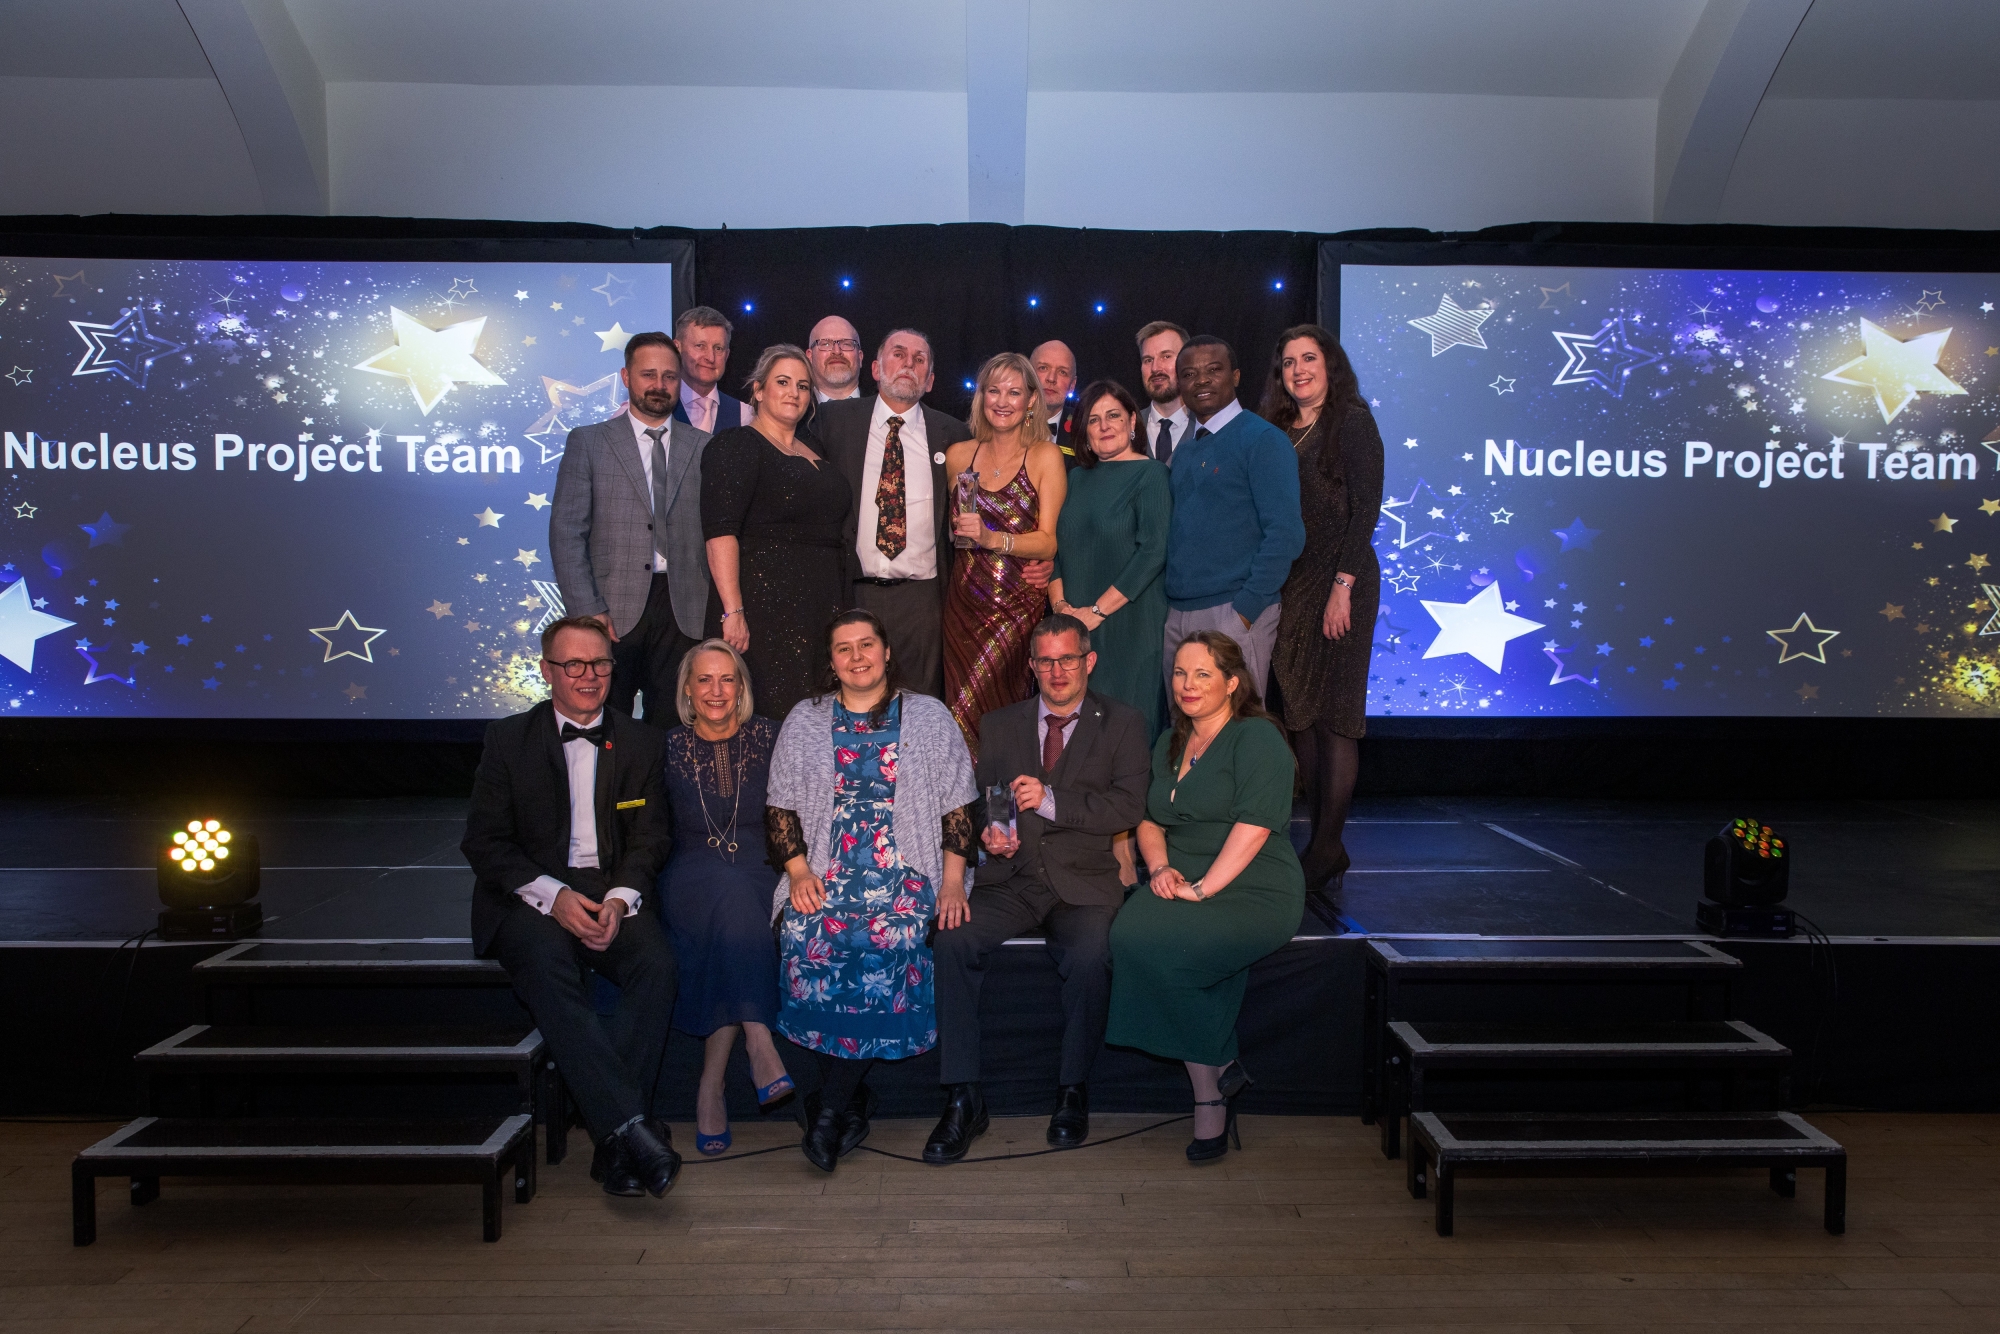 Nucleus project team onstage at the awards ceremony.